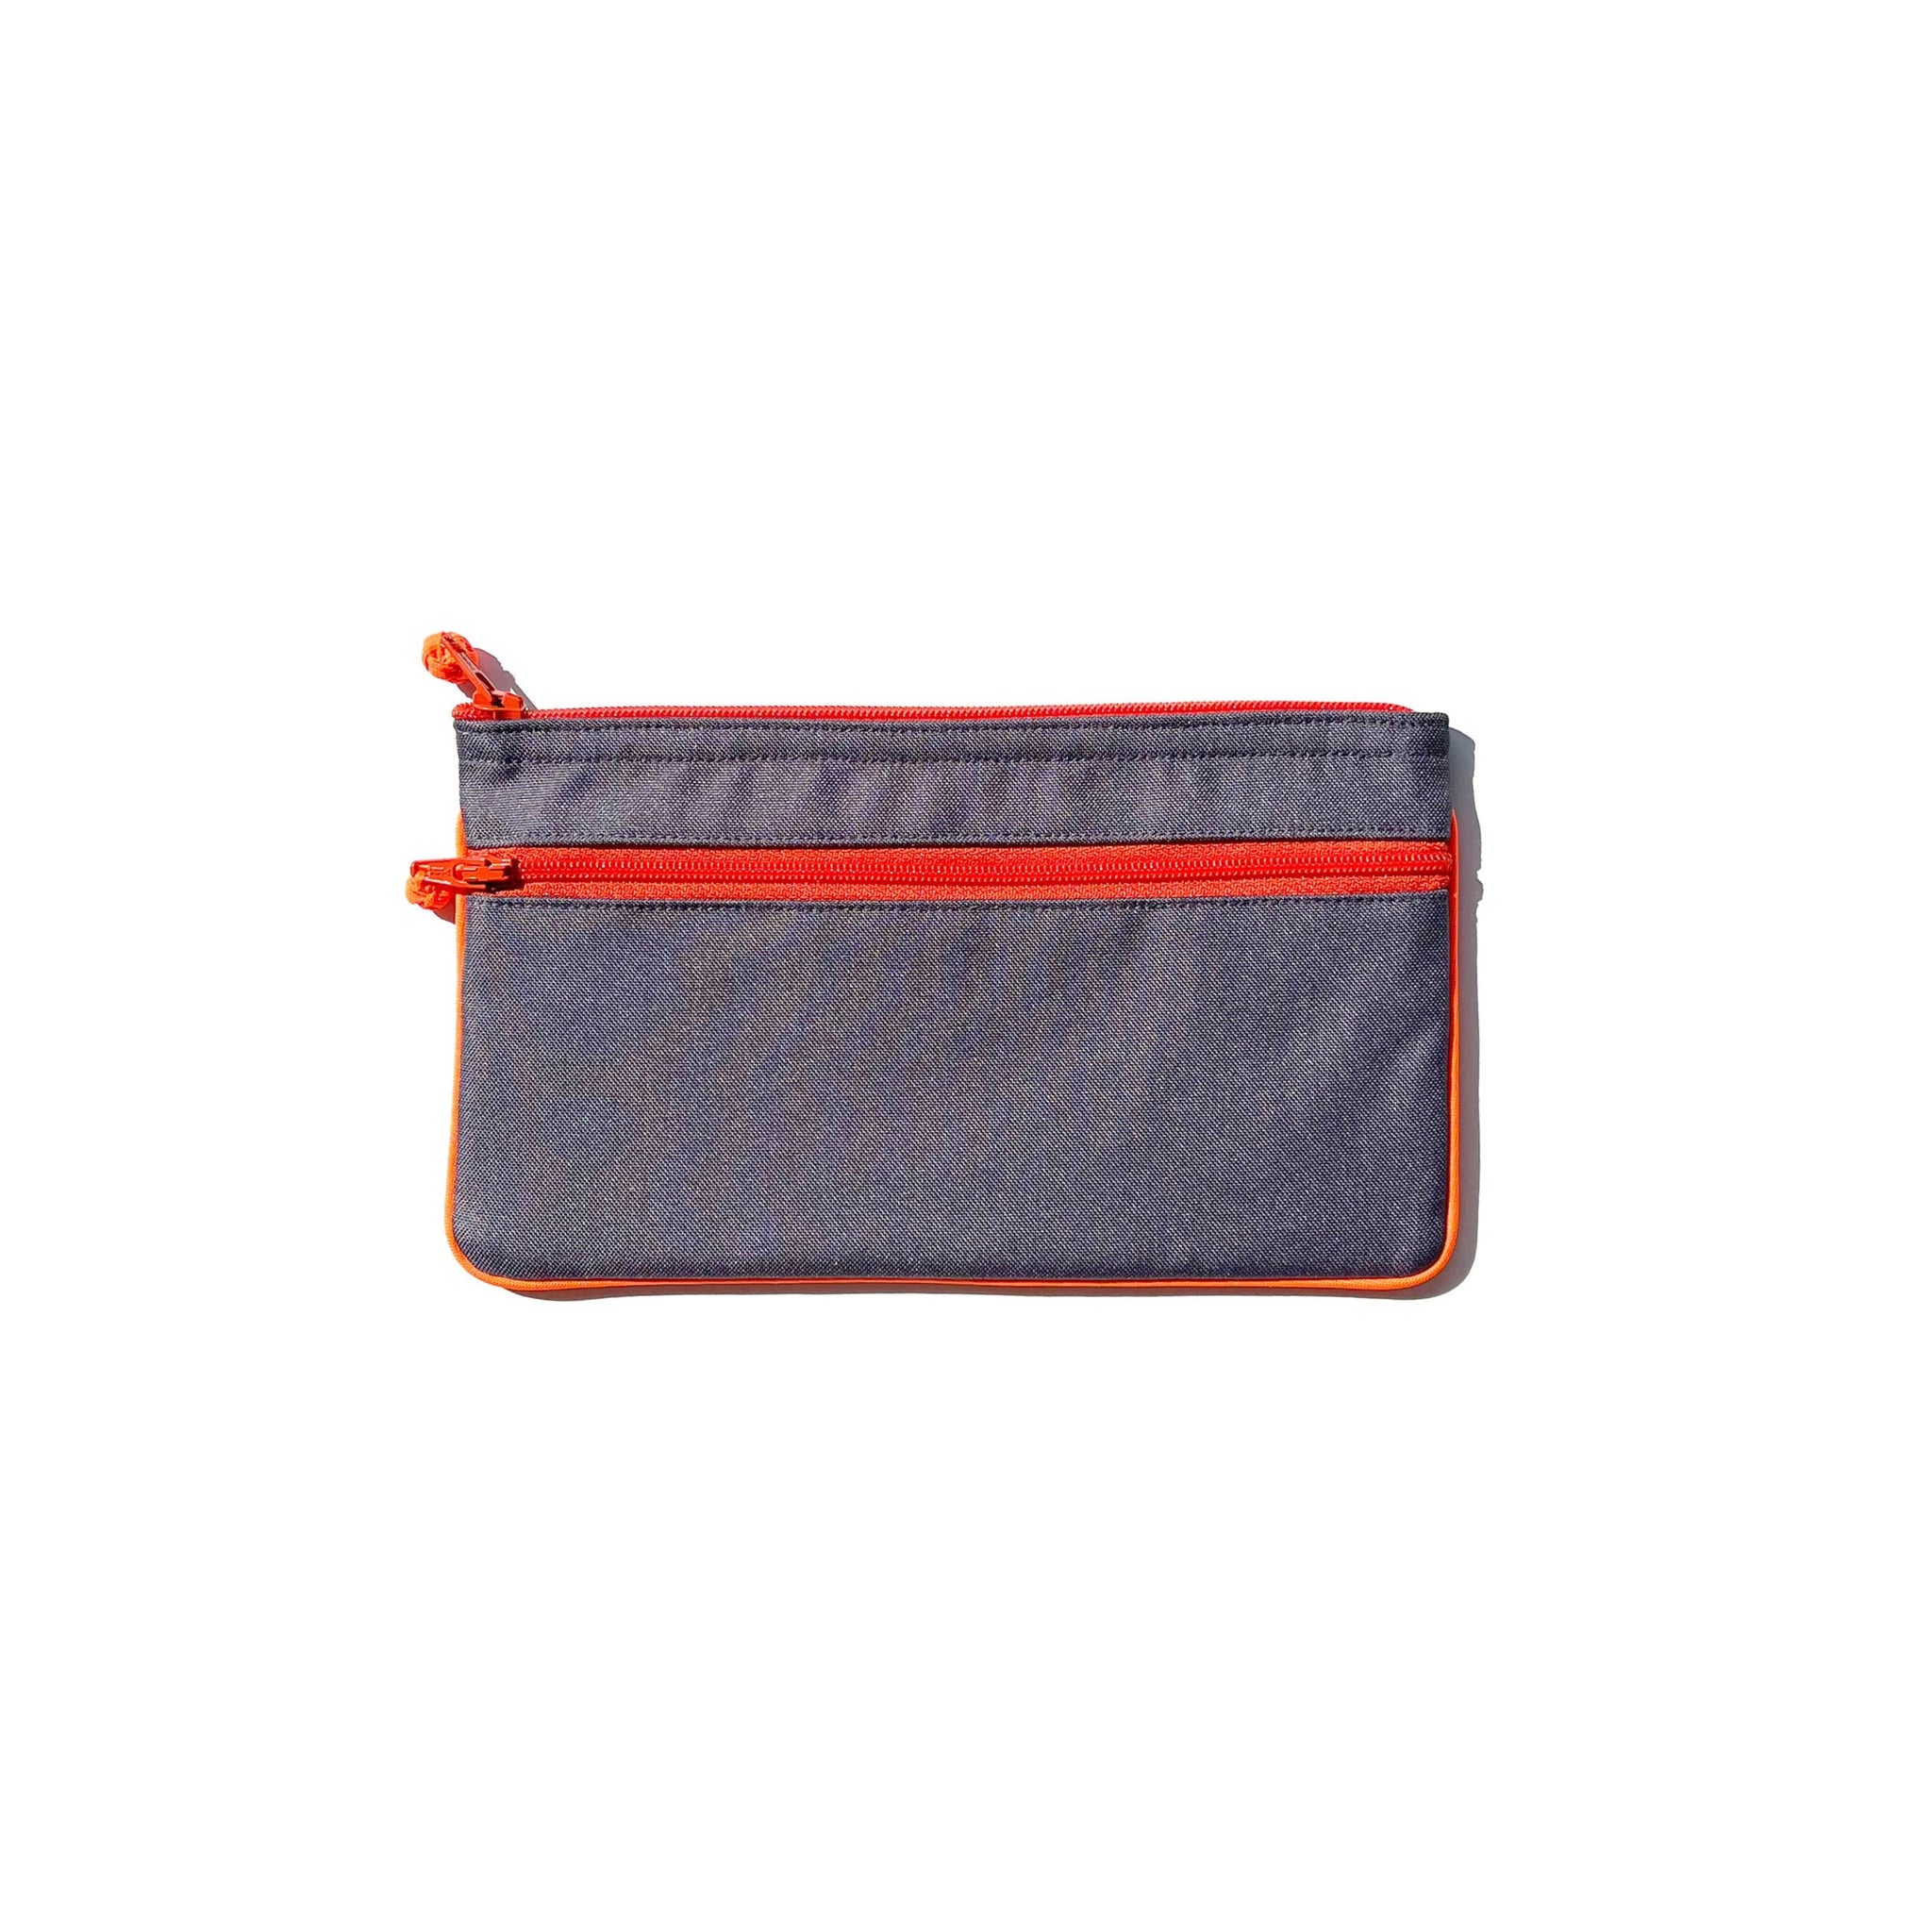 recycled double zipper wallet purse in grey